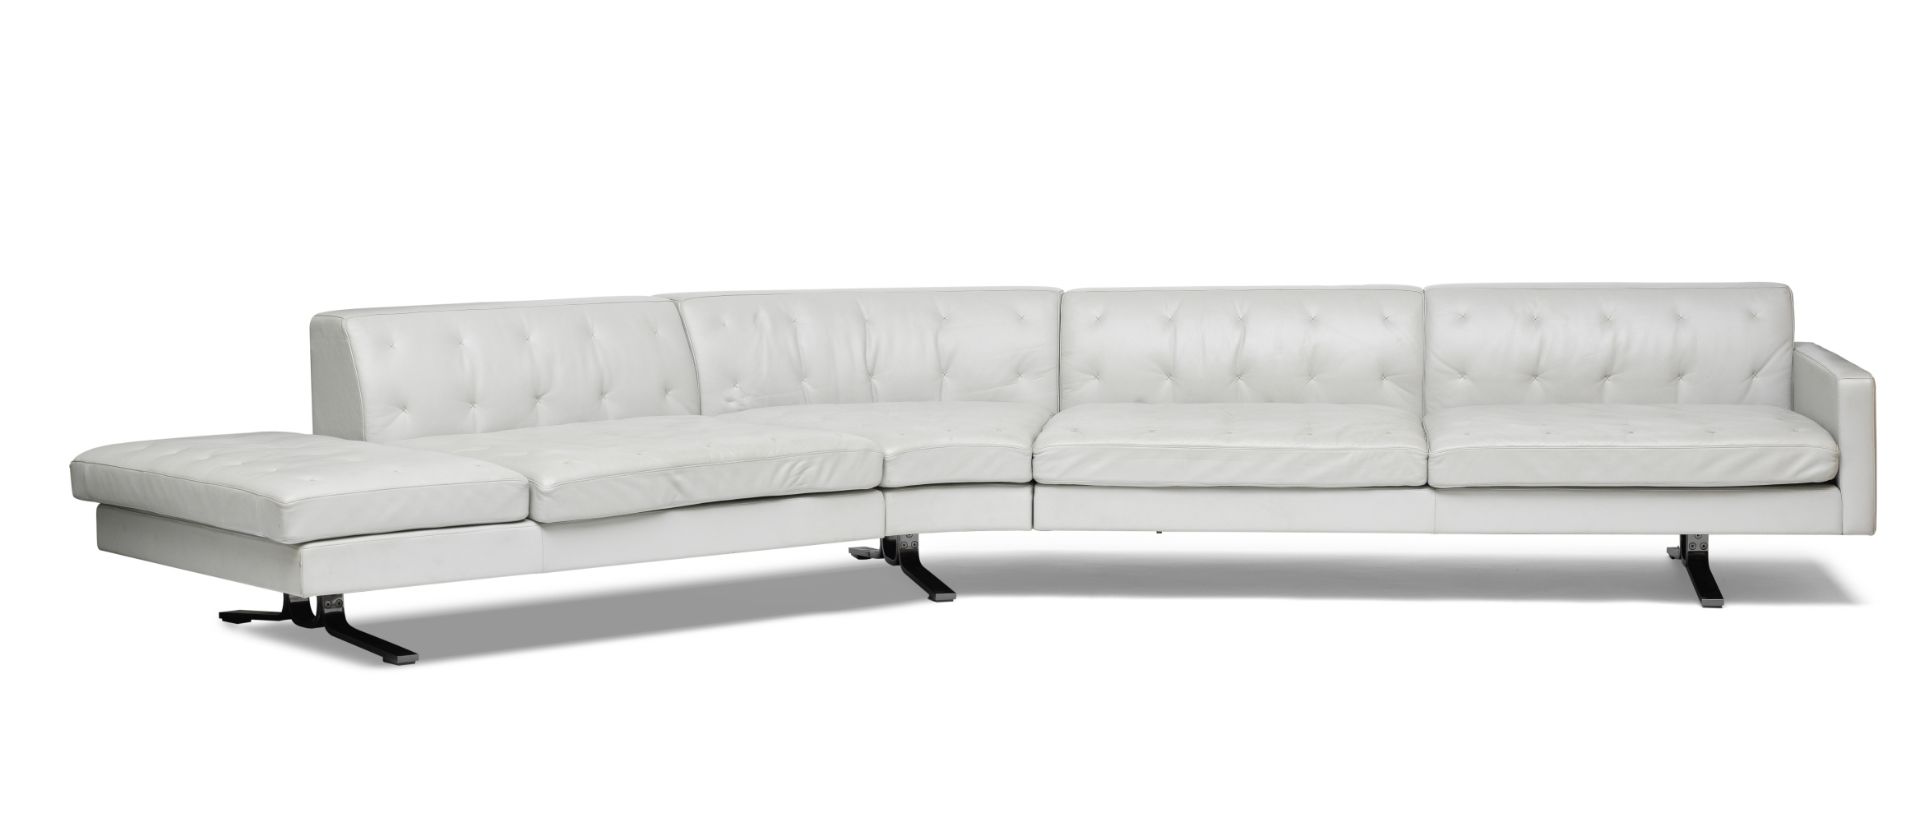 A large grey leather upholstered Kennedee sofa Designed by Jean-Marie Massaud, made by Poltrona Frau